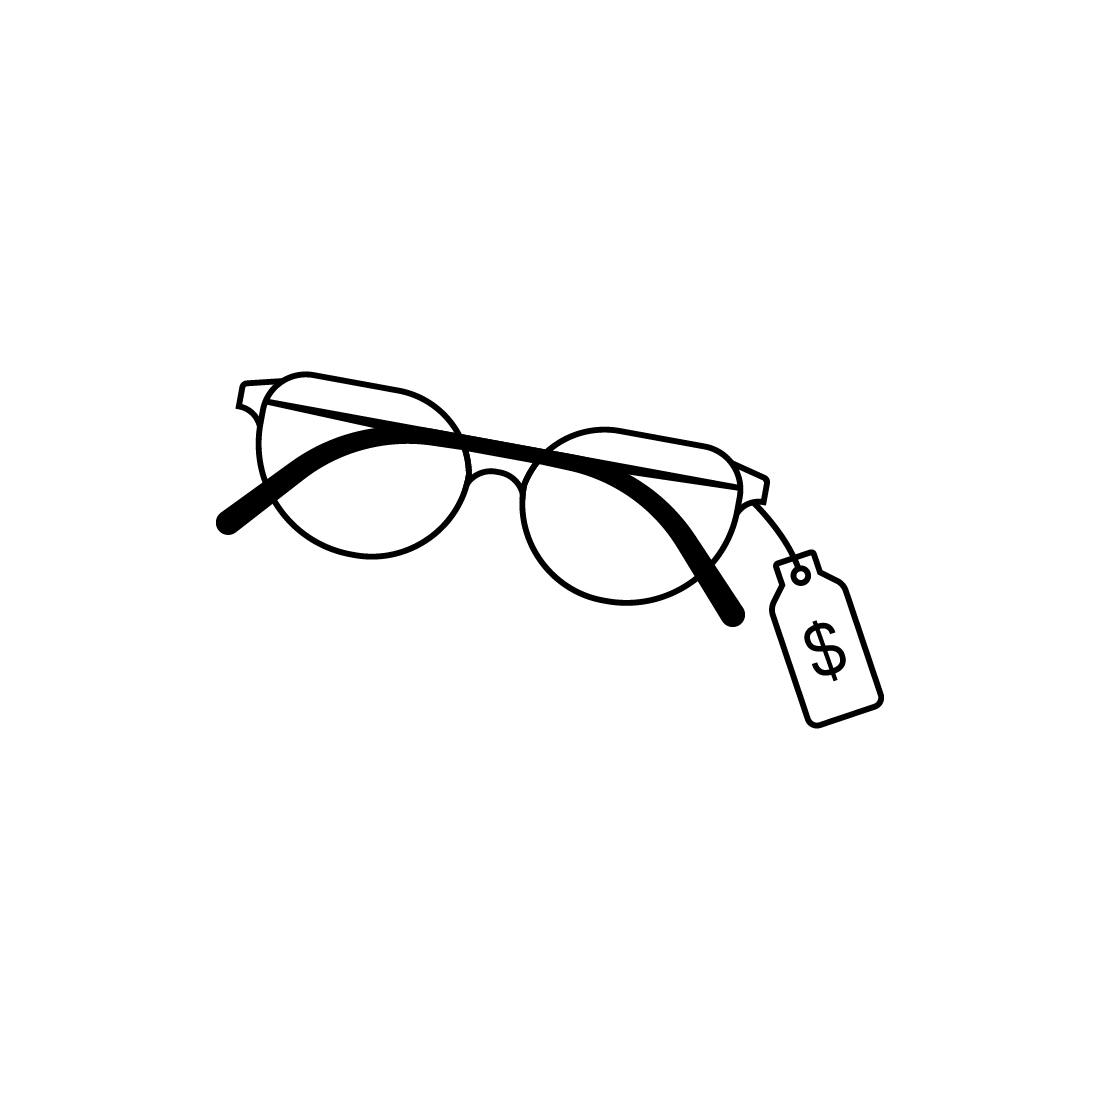 Pair of glasses with a price tag.